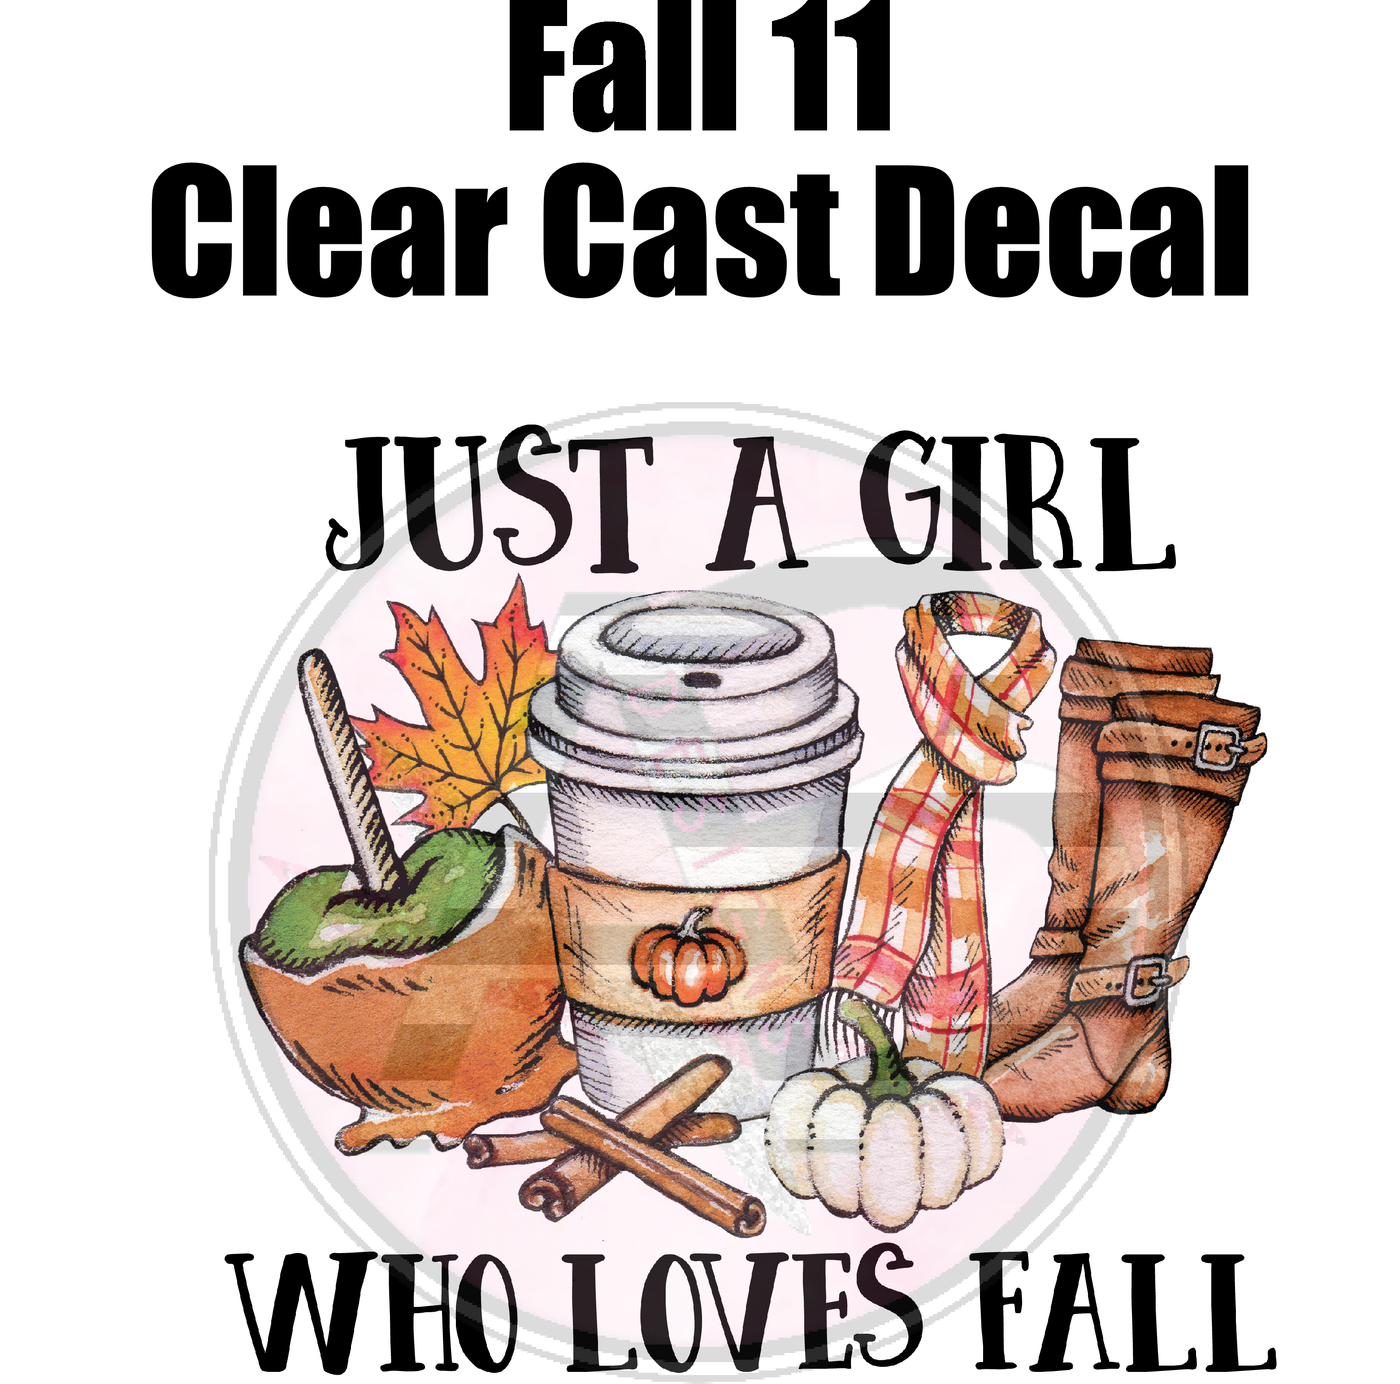 Fall 11 - Clear Cast Decal